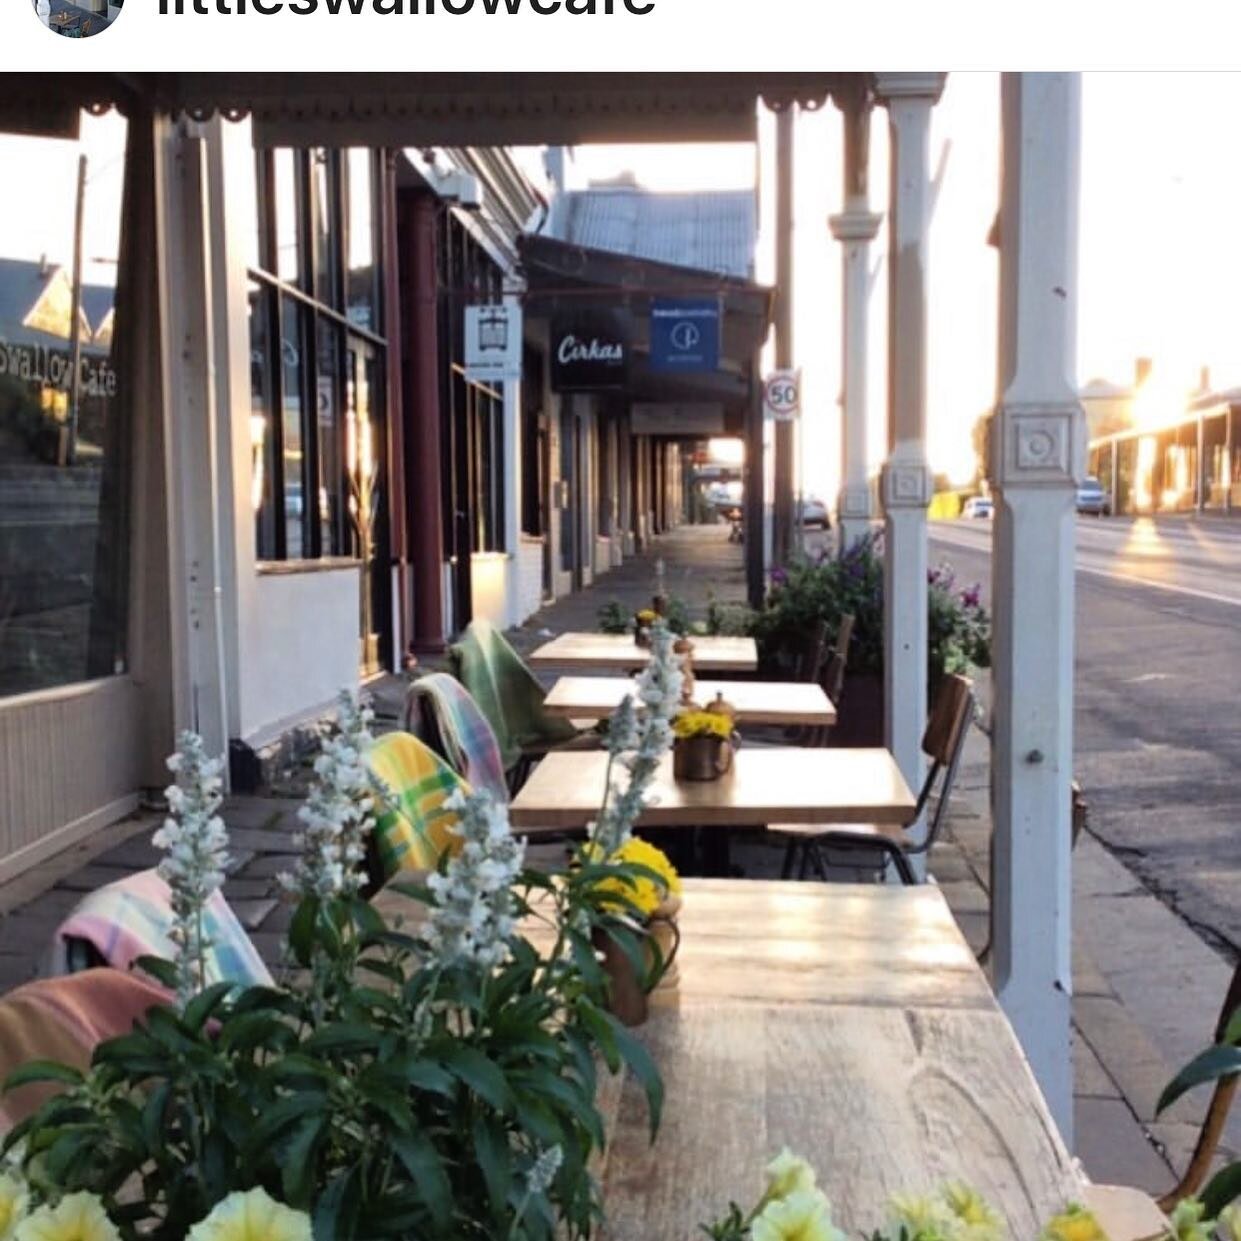 IT TAKES A VILLAGE 🔨 
Little Swallow Cafe + R M Begg Fundraiser

Here's a great way we can support the community-wide drive to raise much-needed funds for R M Begg during this challenging time PLUS we get to enjoy our choice of a great local coffee,